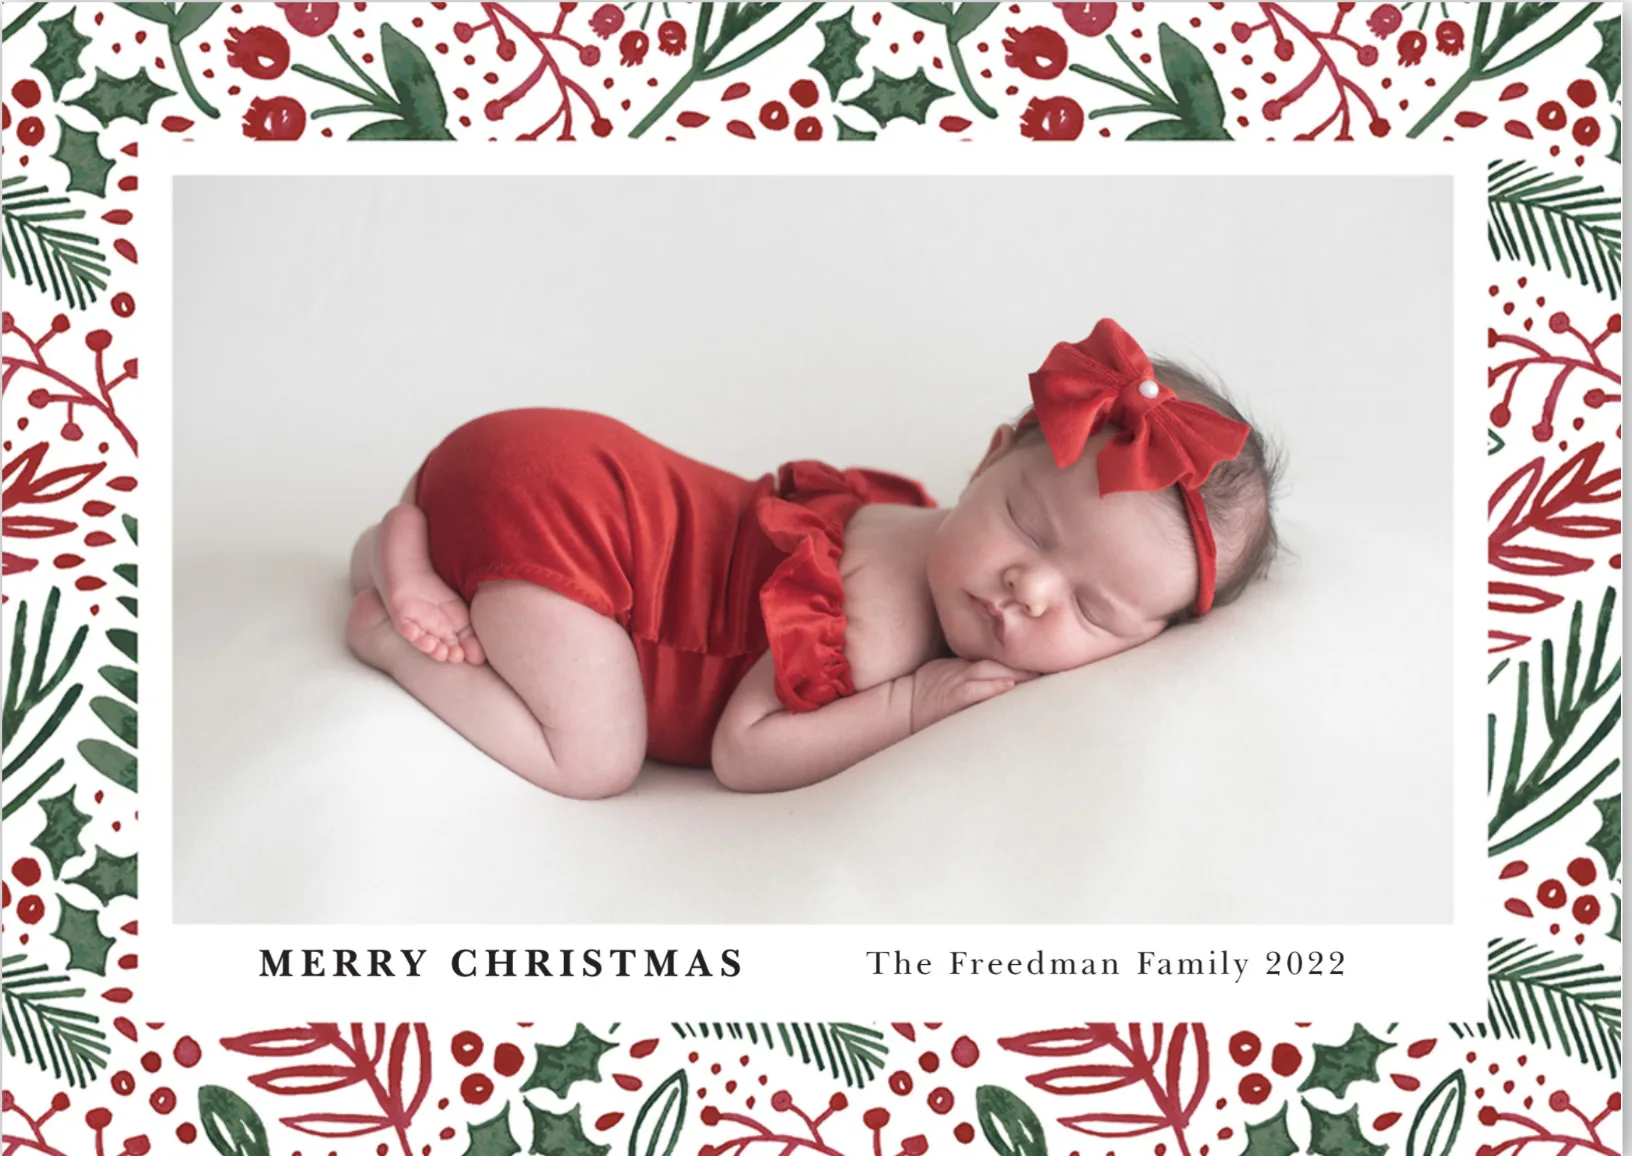 Christmas card featuring a photo of a newborn baby in red